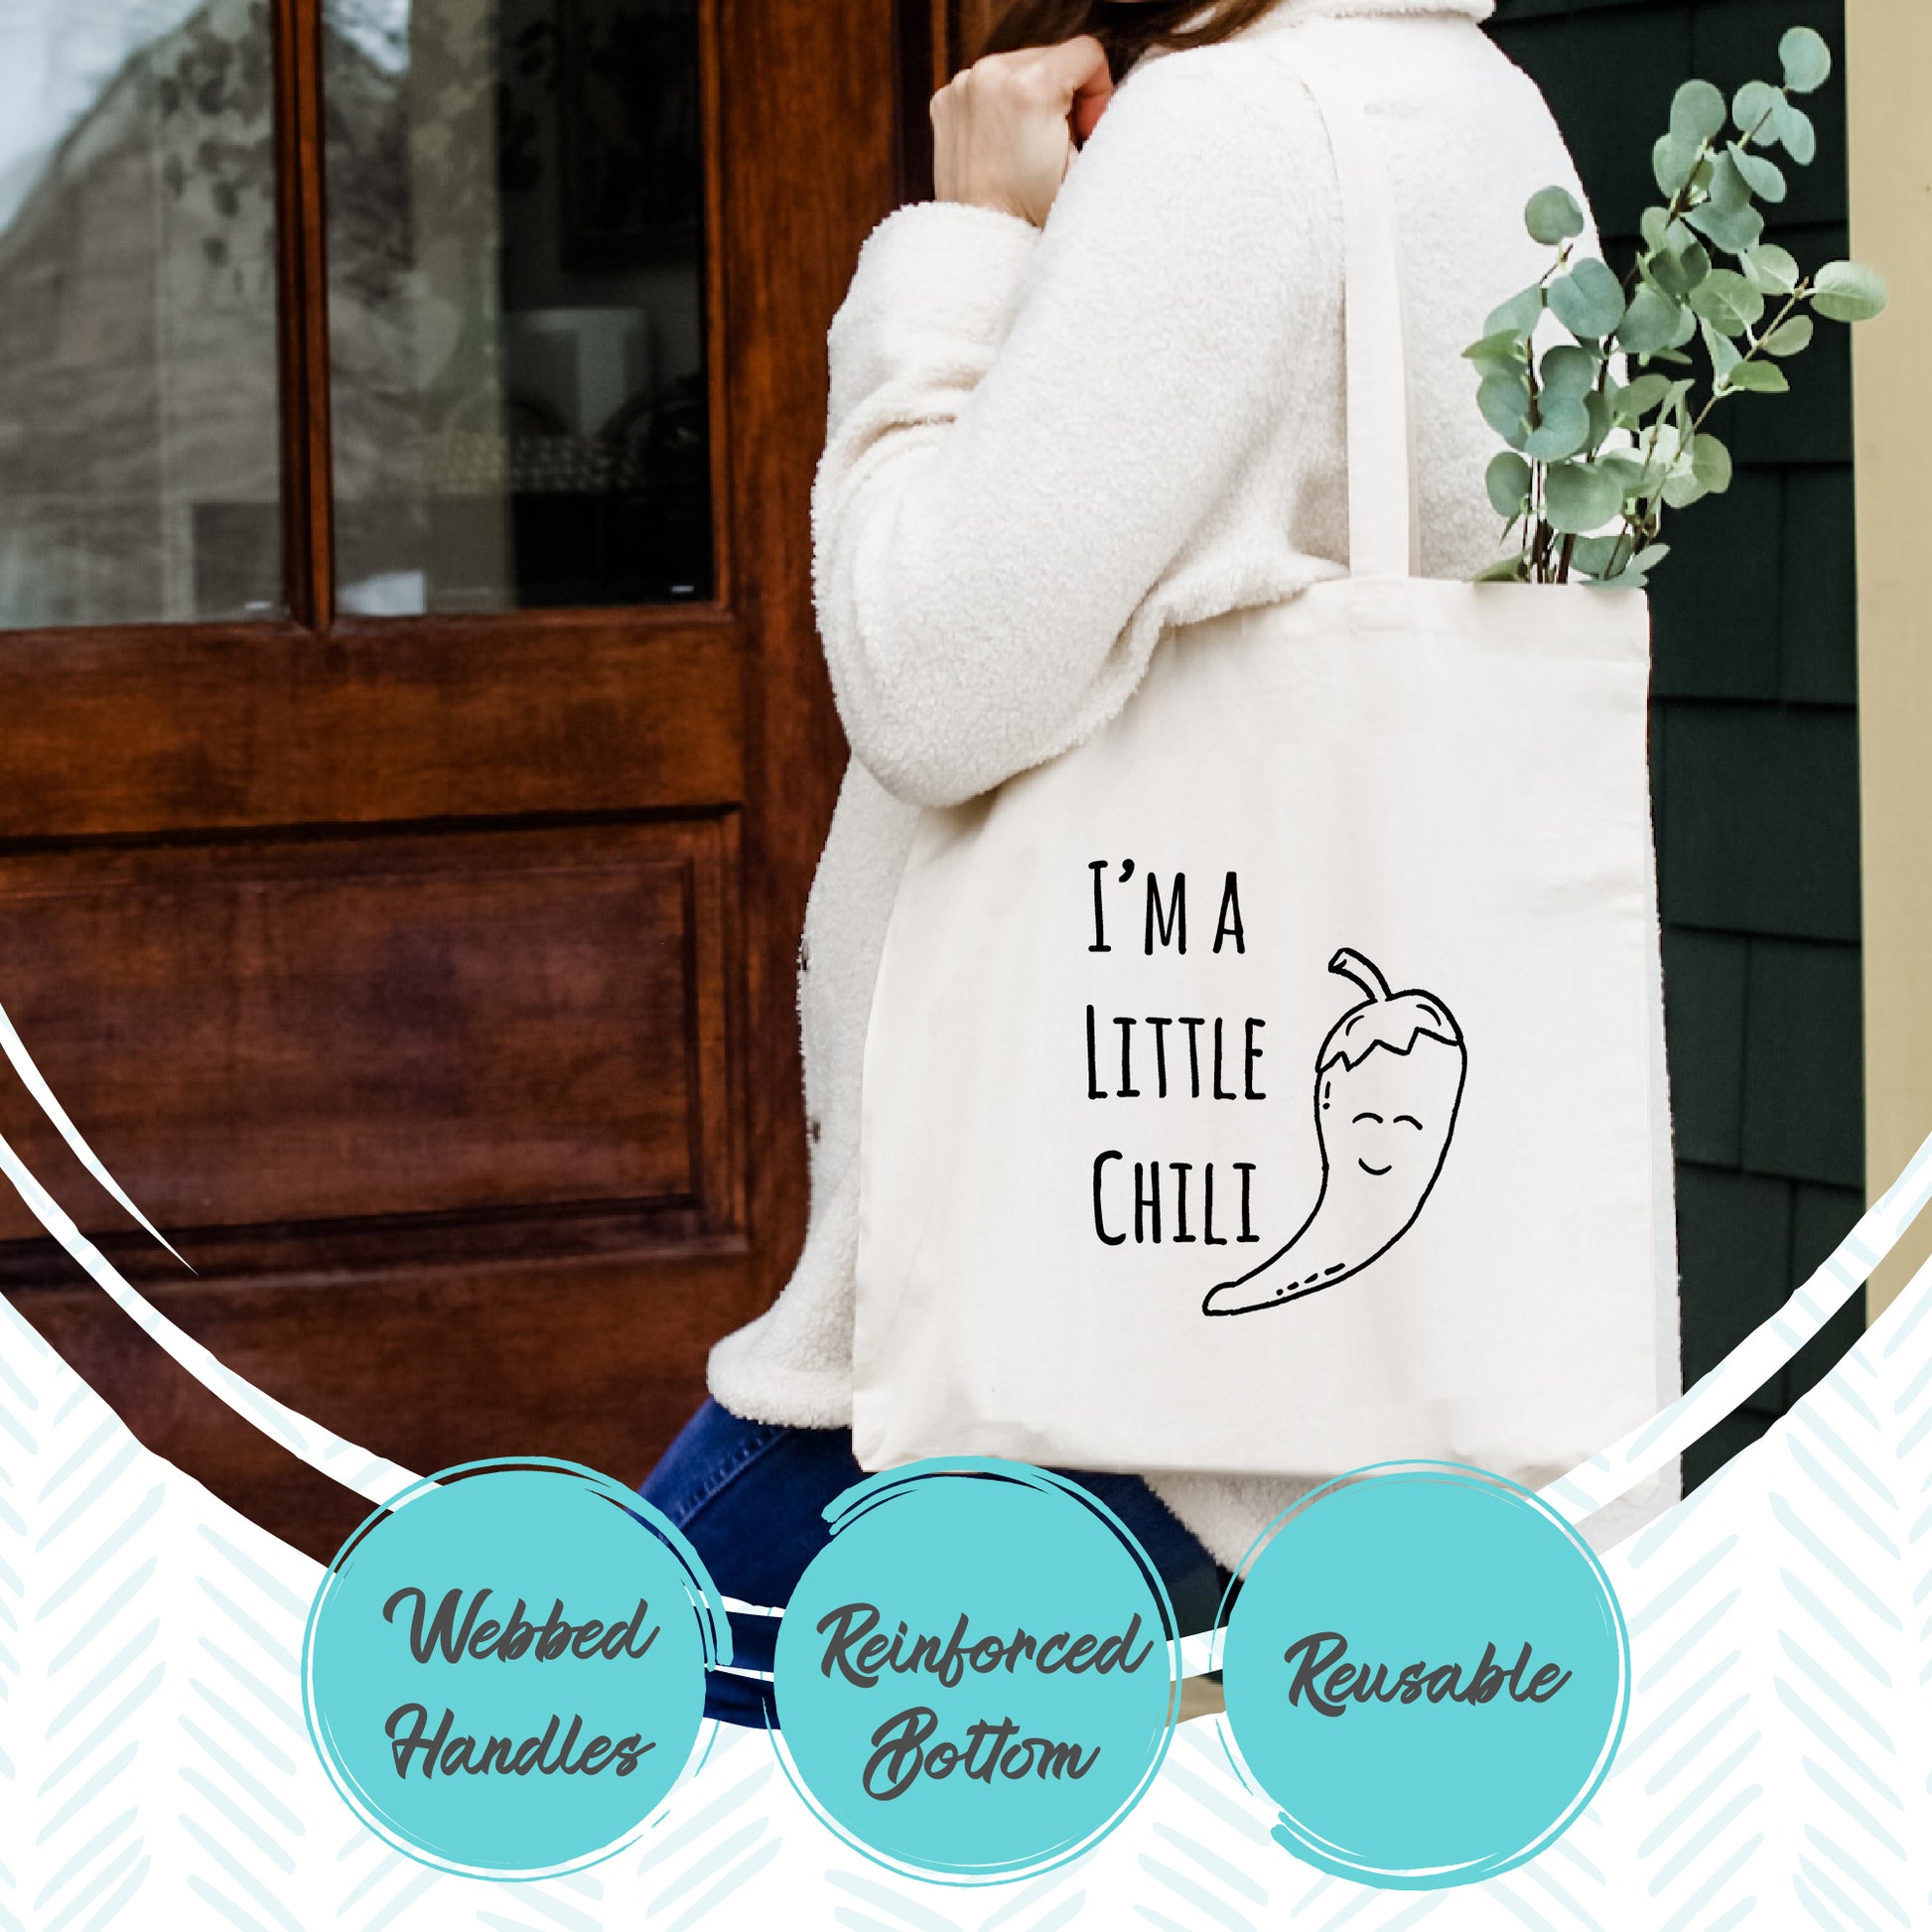 Aloe From The Other Side - Tote Bag - MoonlightMakers